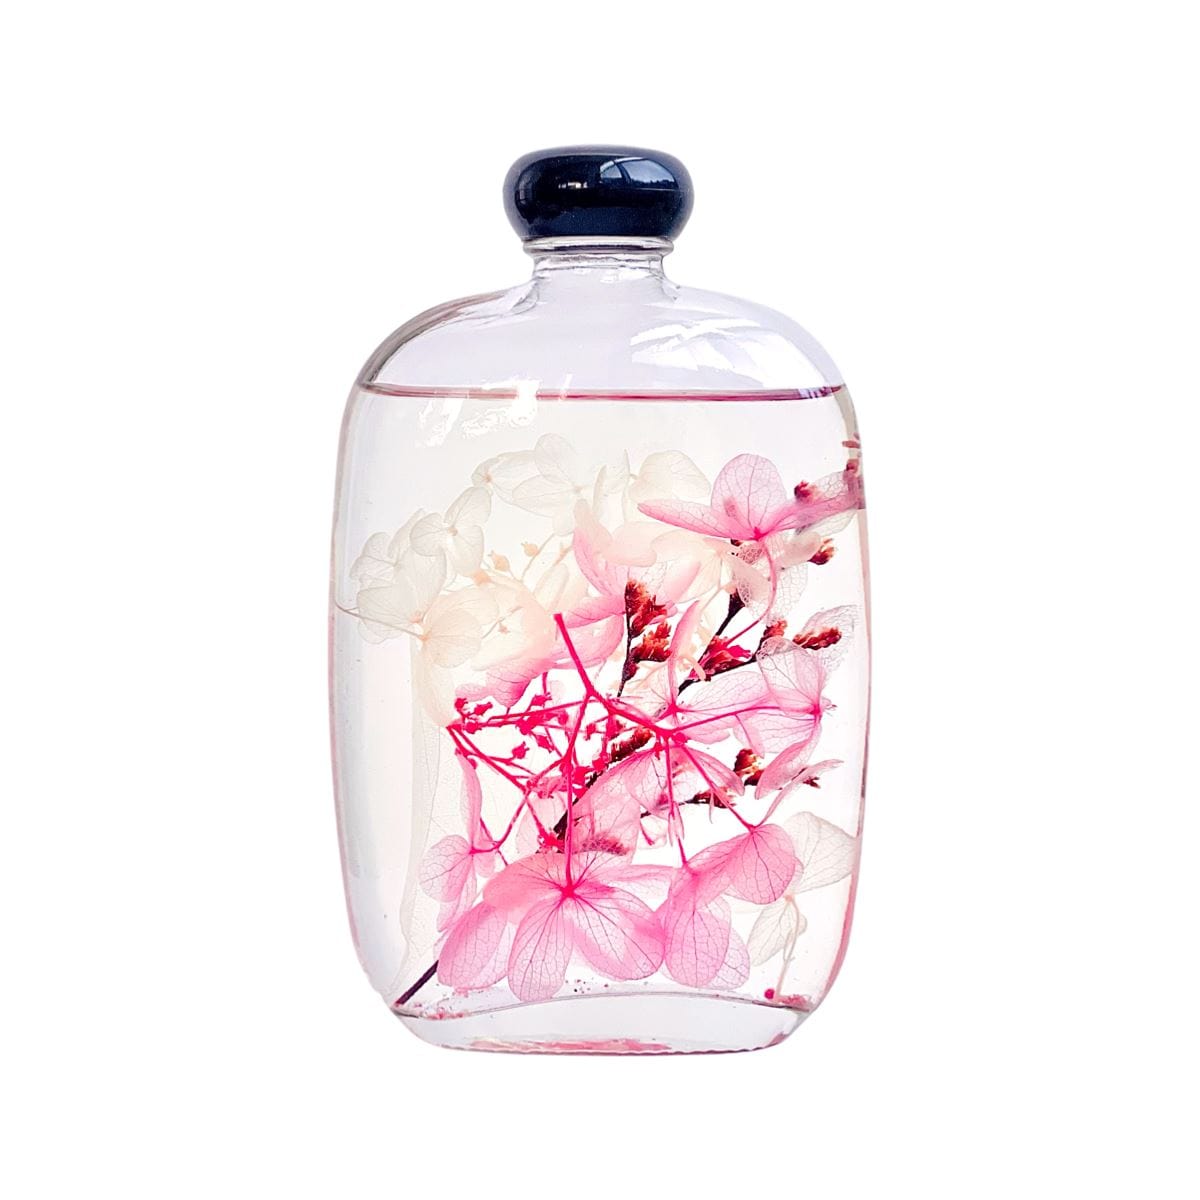 Kiki Botanical Aromatherapy Scent Diffuser - 230ml - Scent - Fruity Floral - Preserved Flowers & Fresh Flower Florist Gift Store